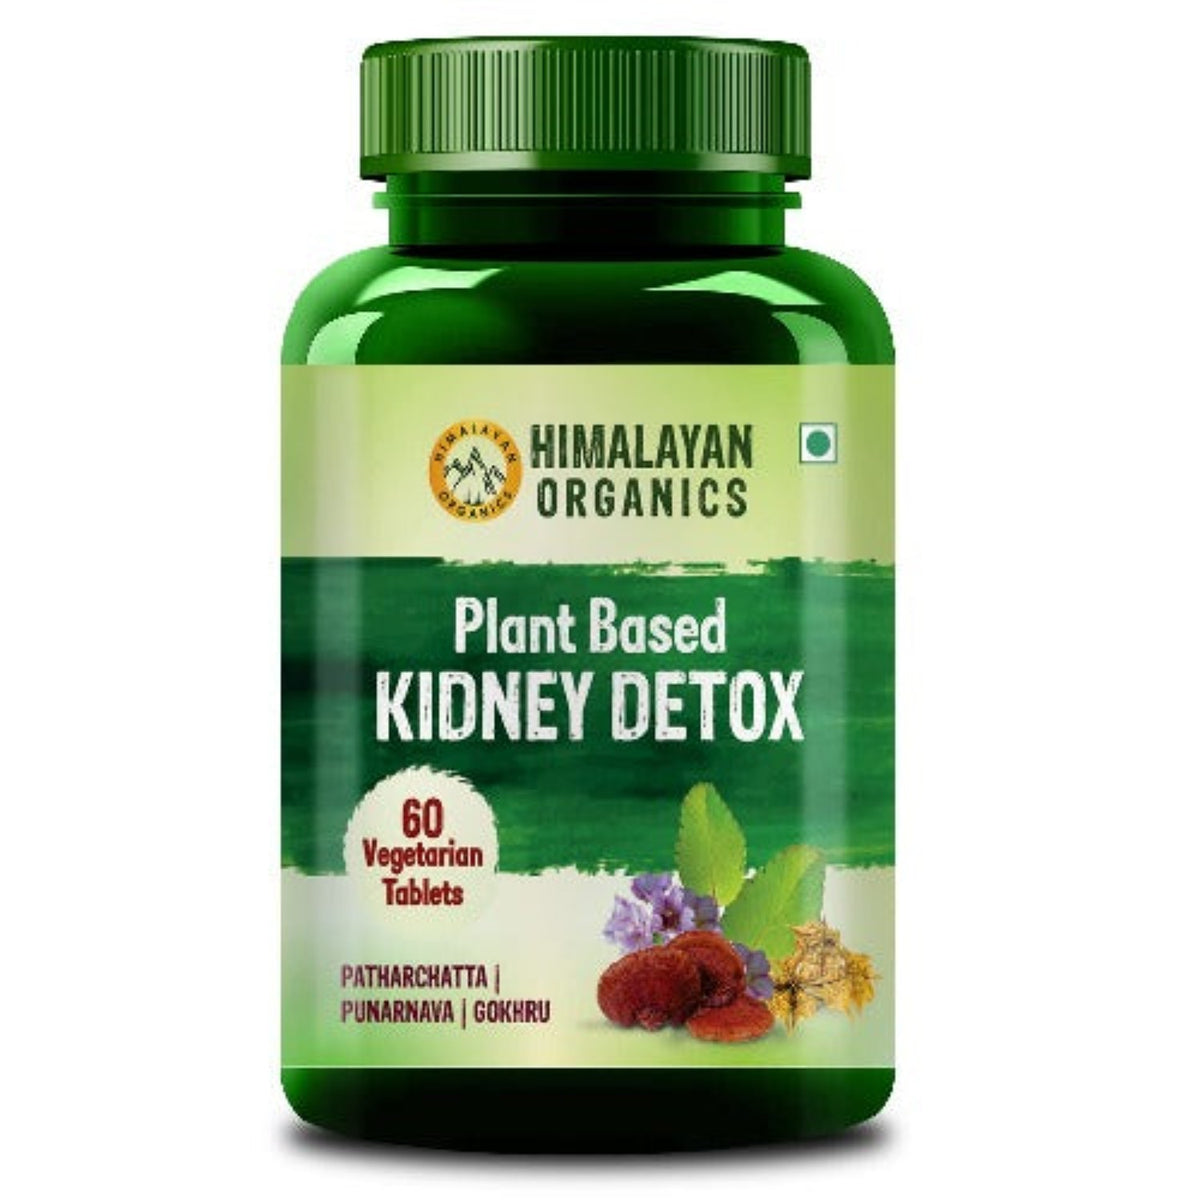 Himalayan Organics Plant Based Kidney Support,Cleanser,Purifier,Patarchata,Fennel,Punernava 60 Vegetarian Capsules